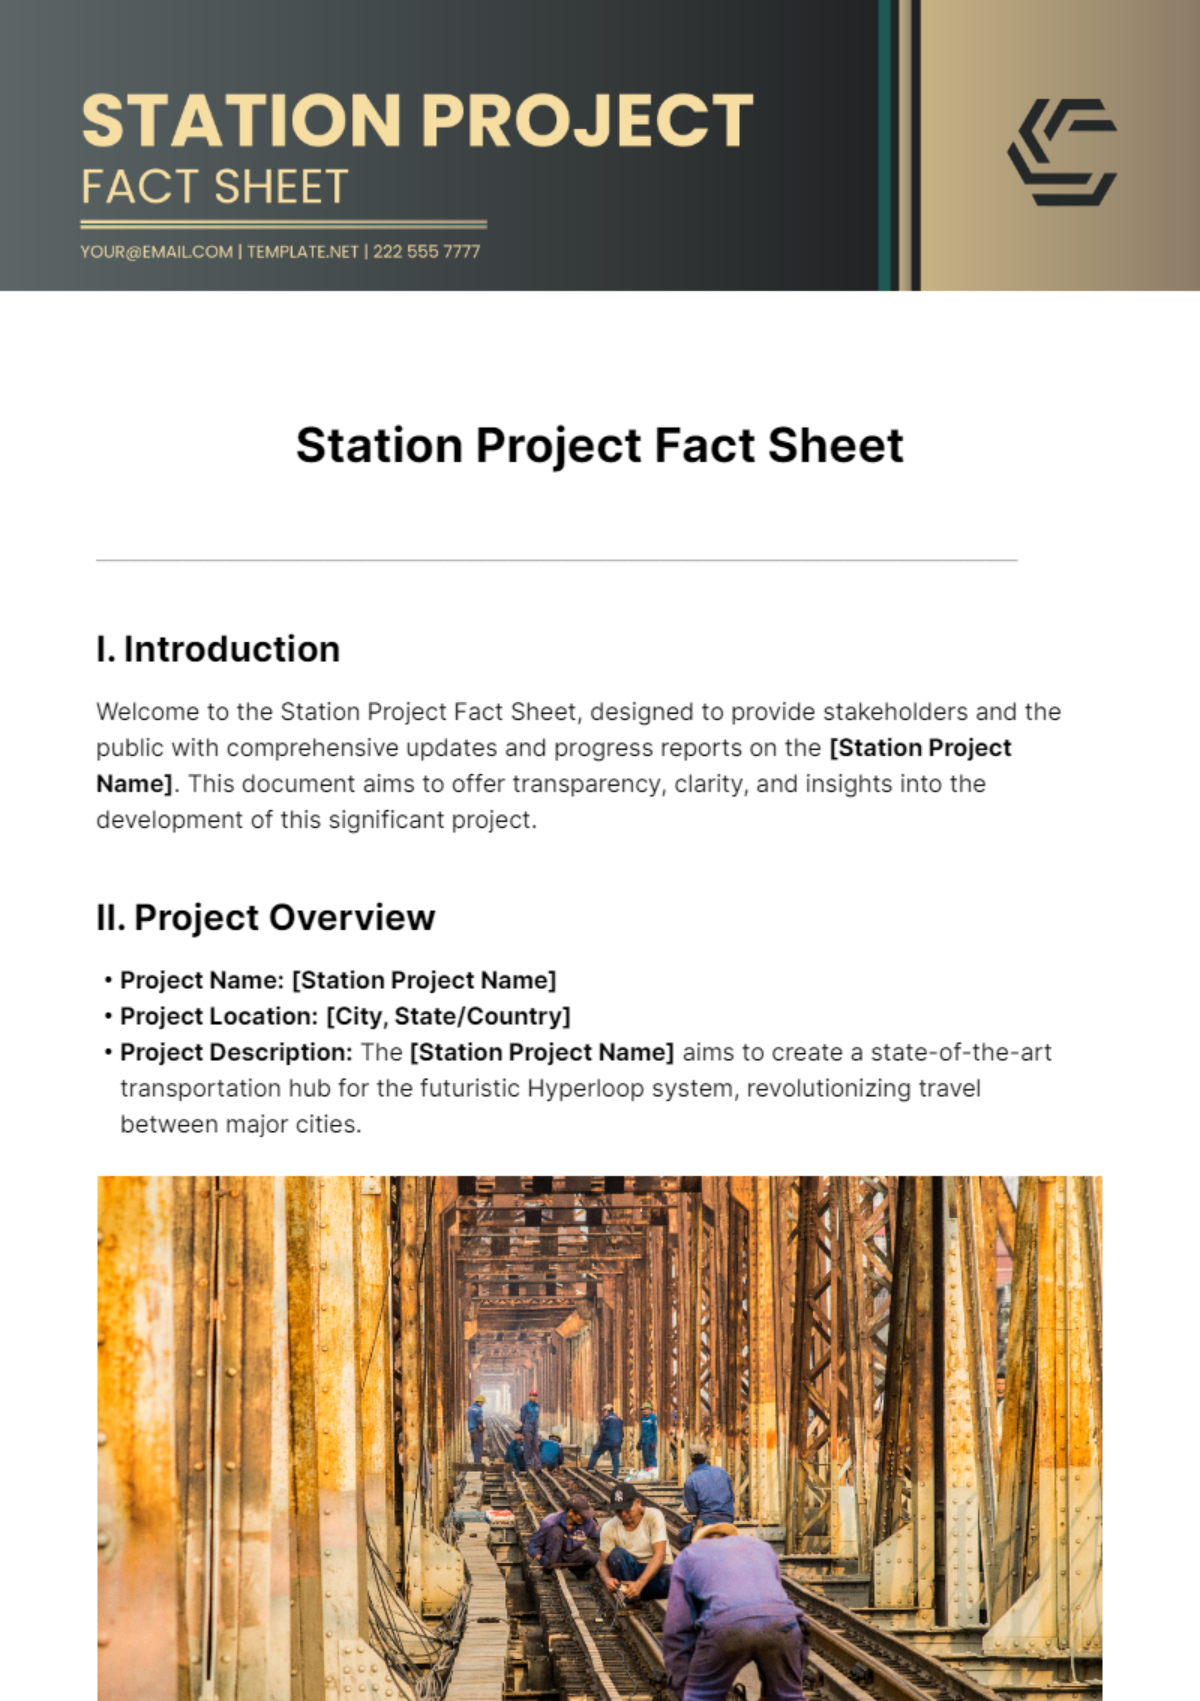 Station Project Fact Sheet Template